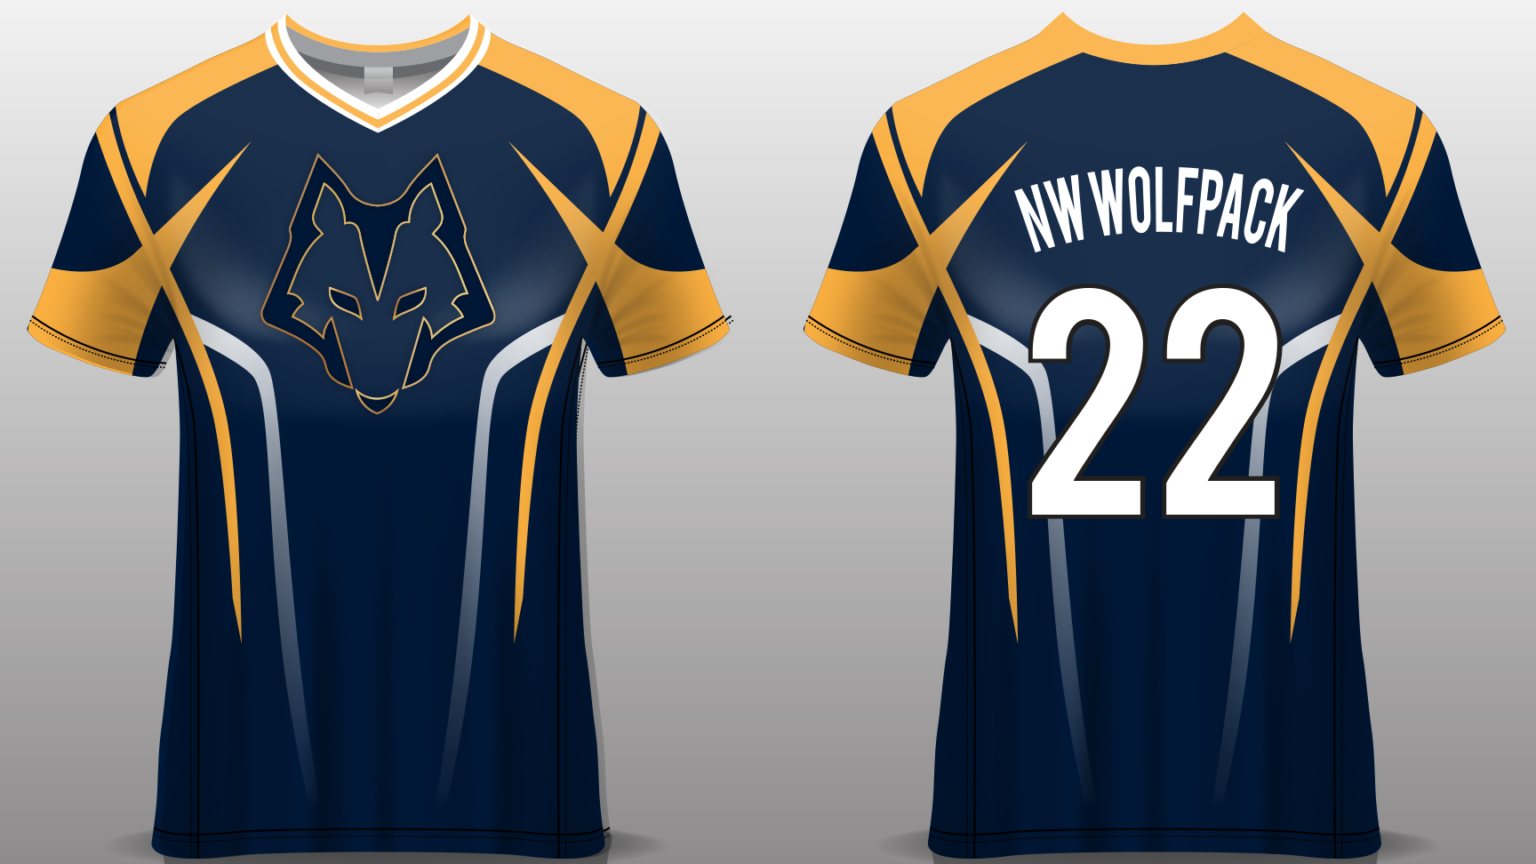 Football Jersey Mock Up for NW Wolfpack